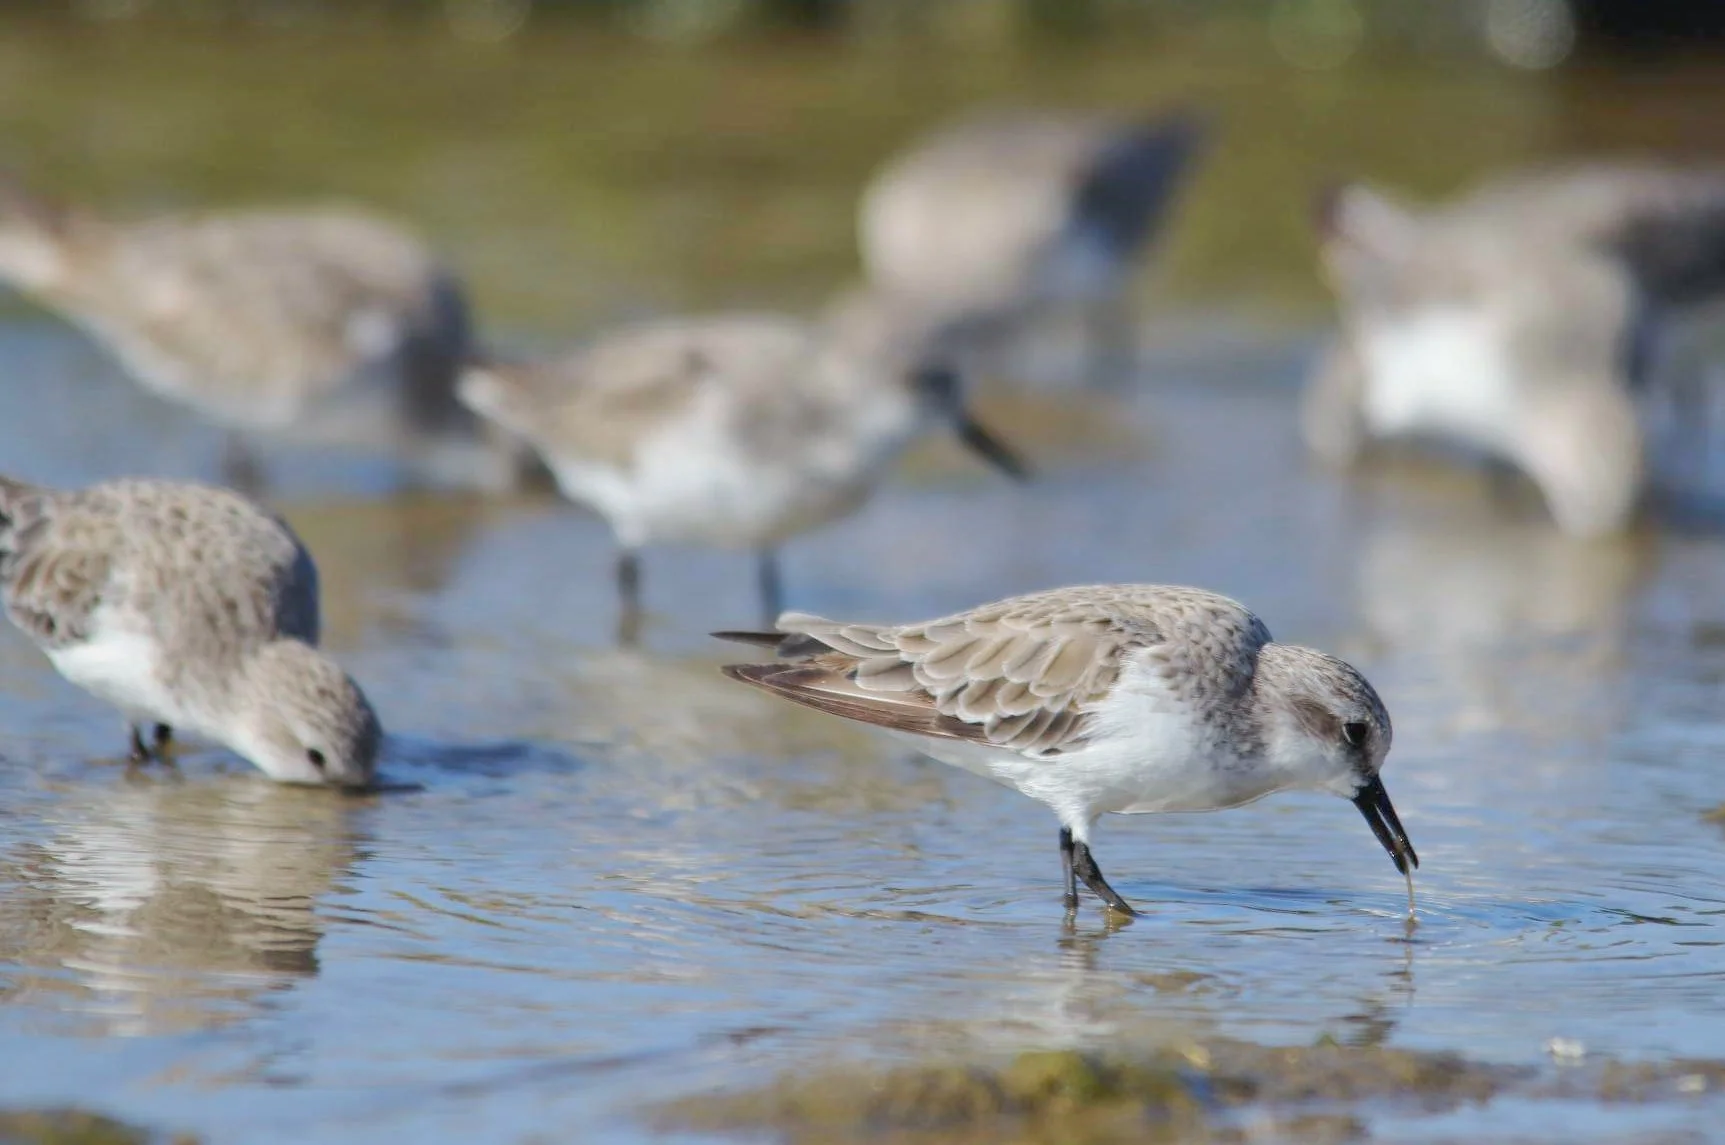 Sandpipers hunting in the Coorong